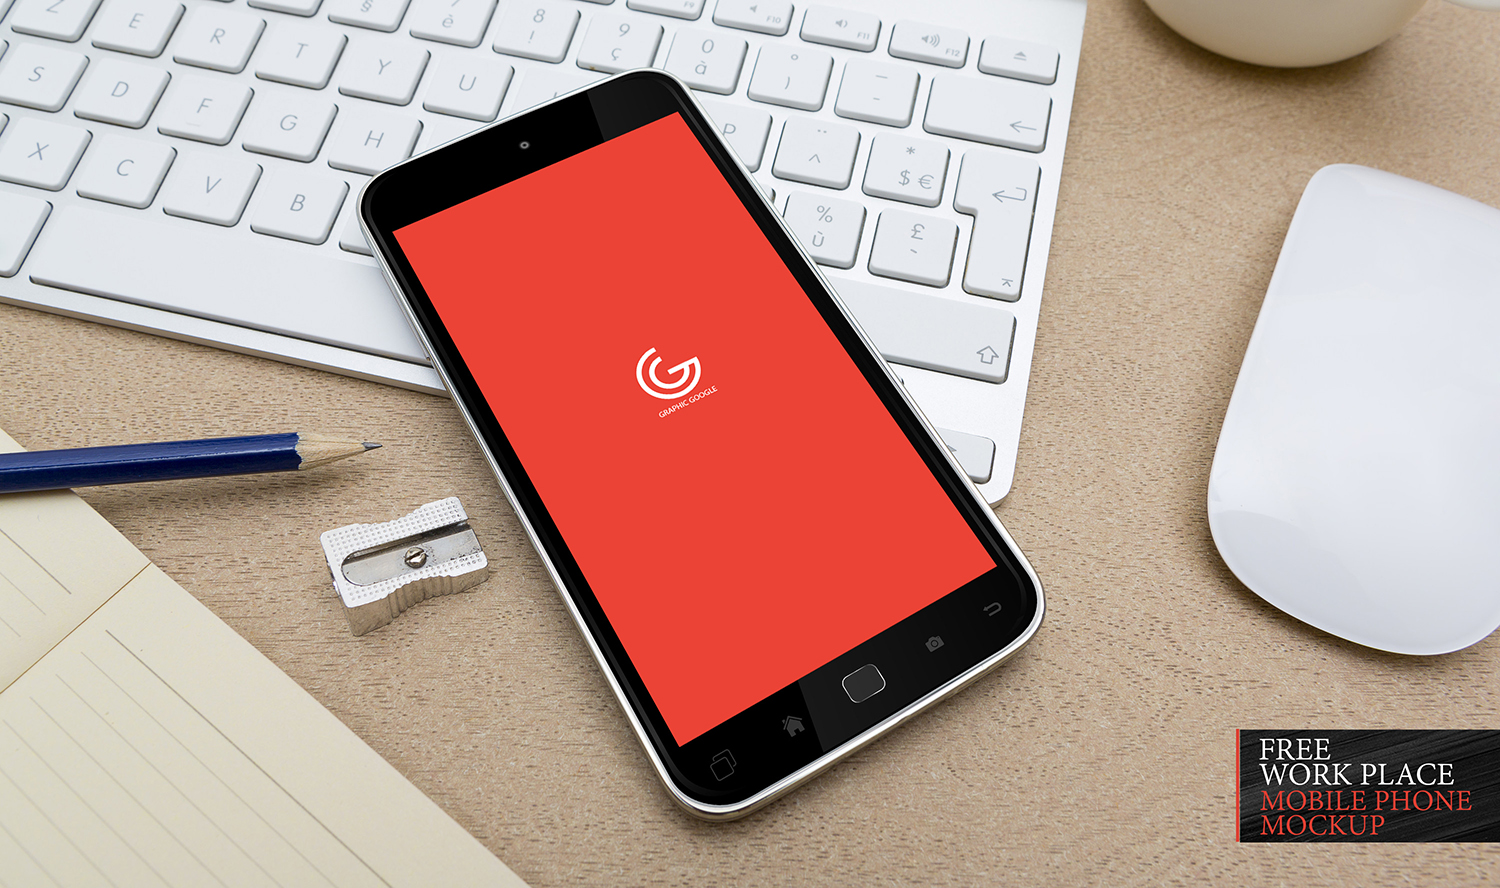 Free Work Place Mobile Phone Mockup